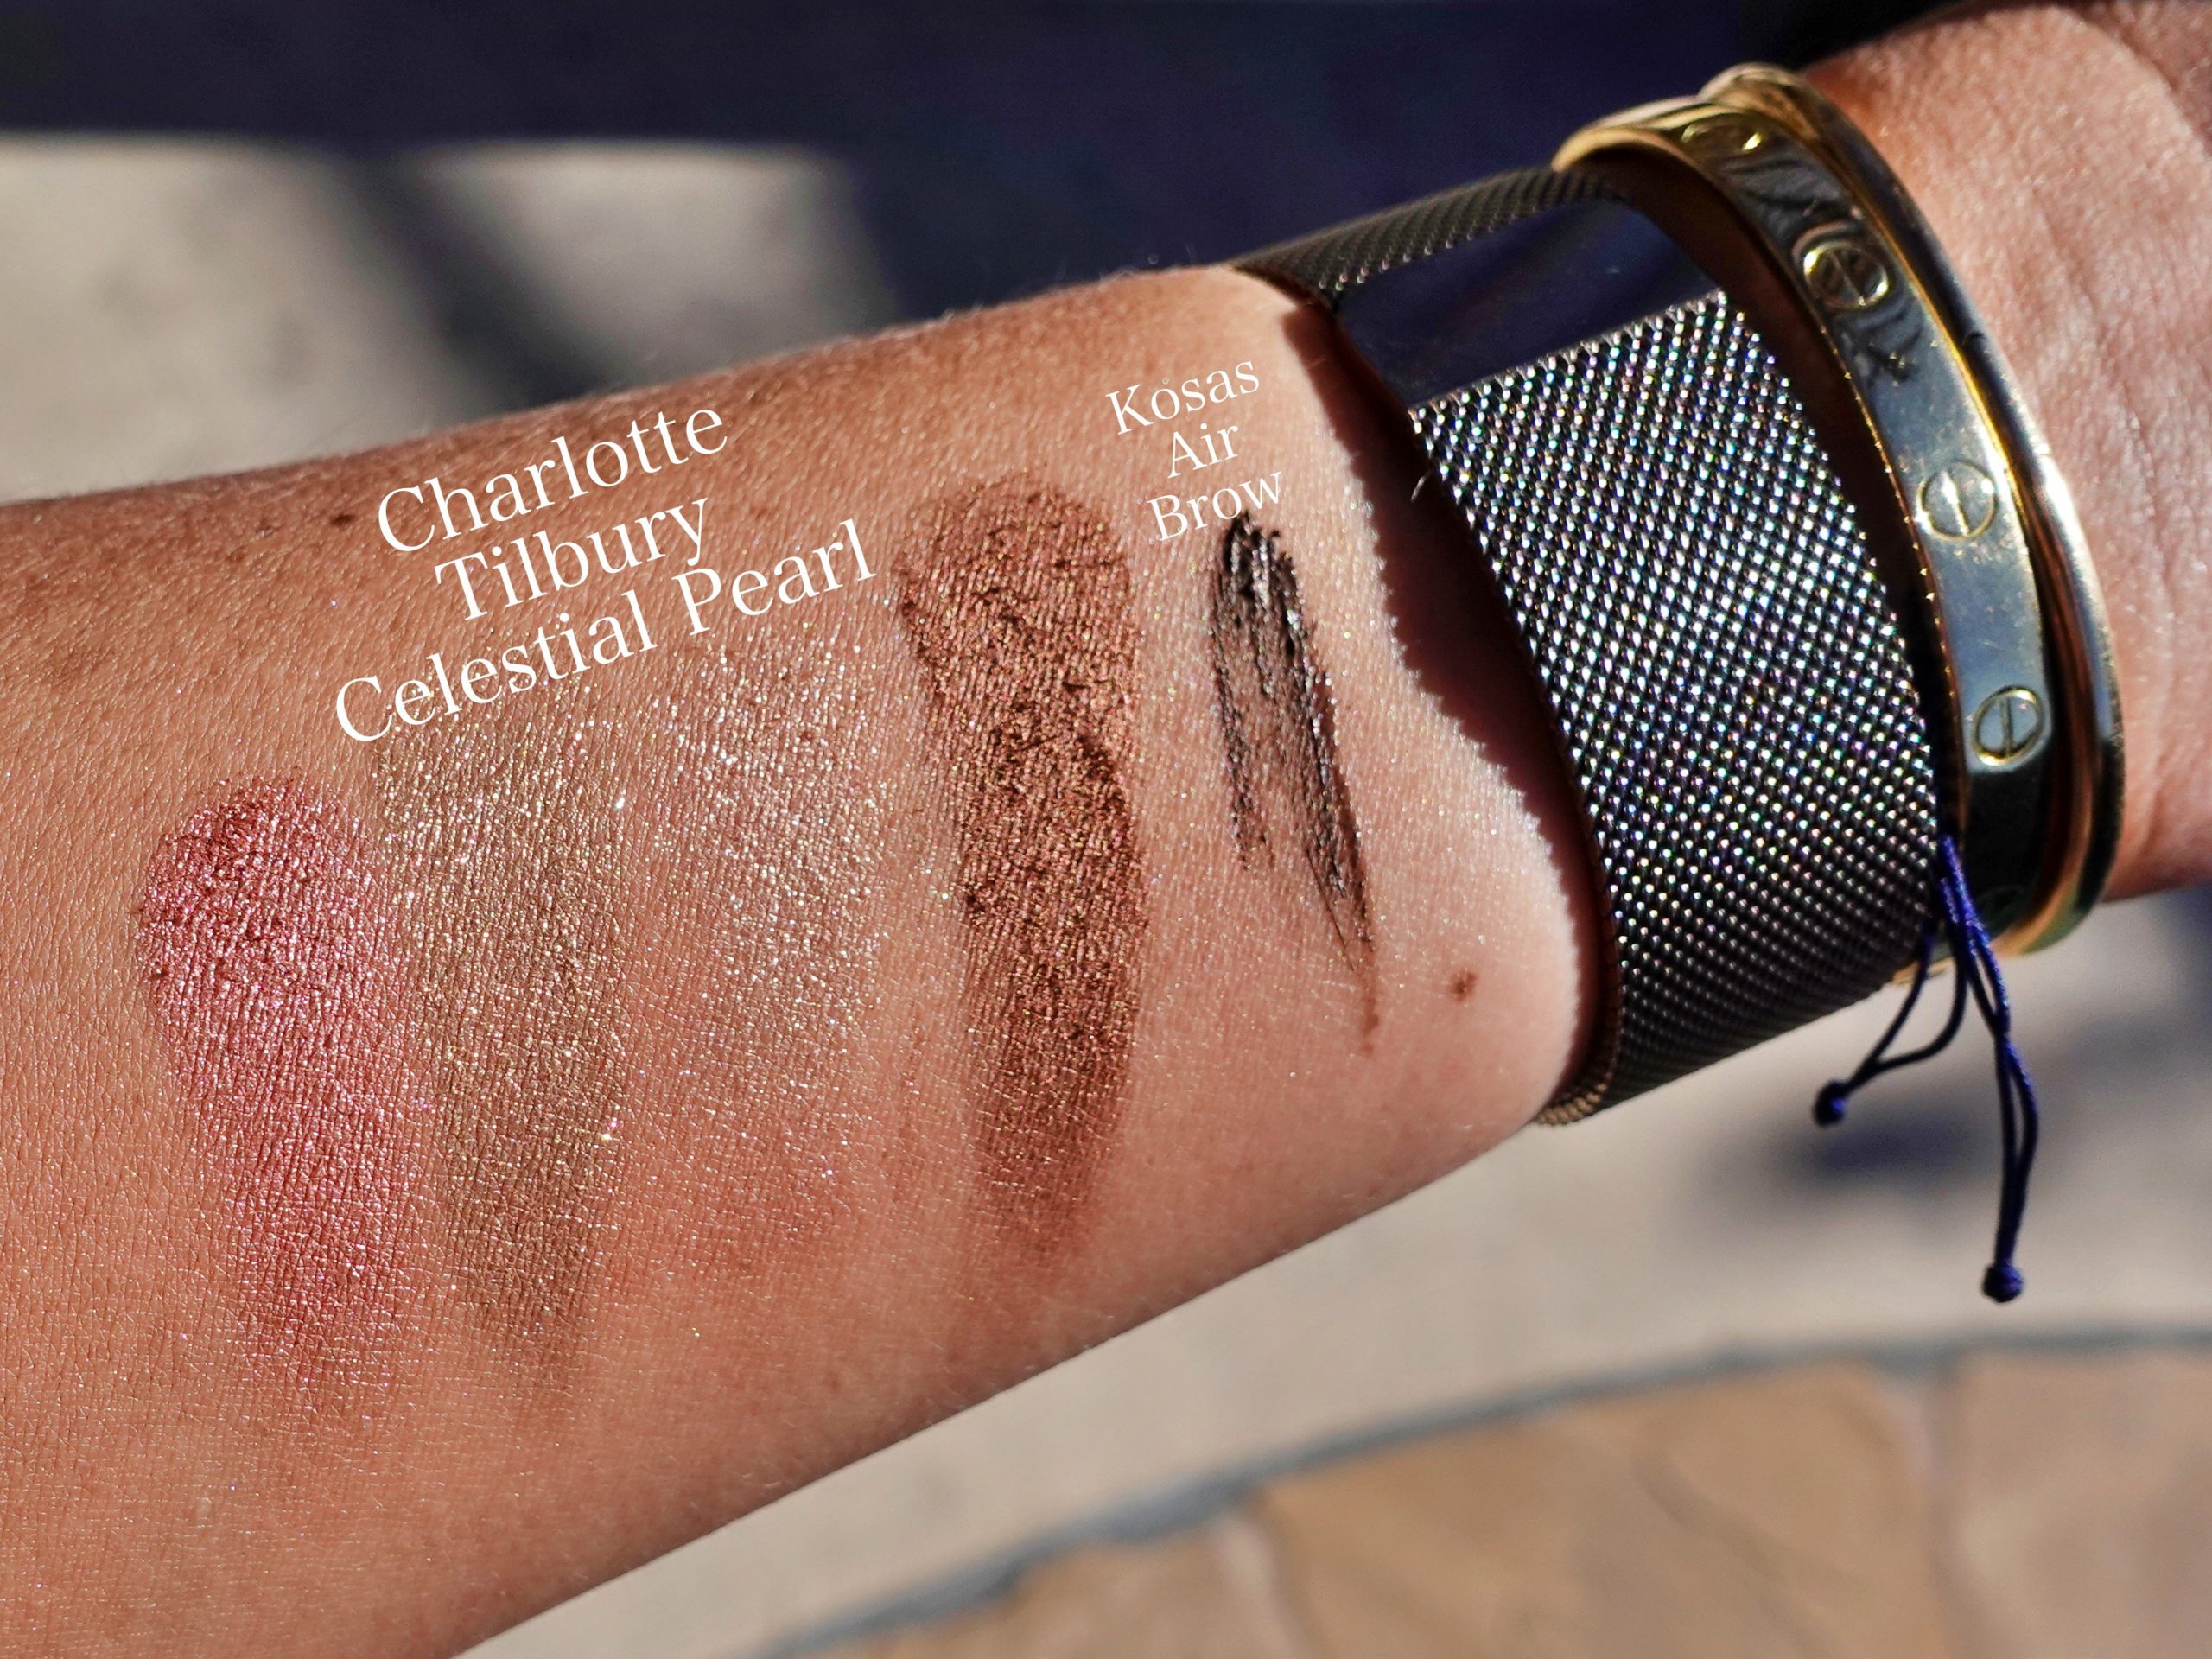 Swatches of the Charlotte Tilbury Celestial Pearl Palette in direct sunlight for here comes the sun